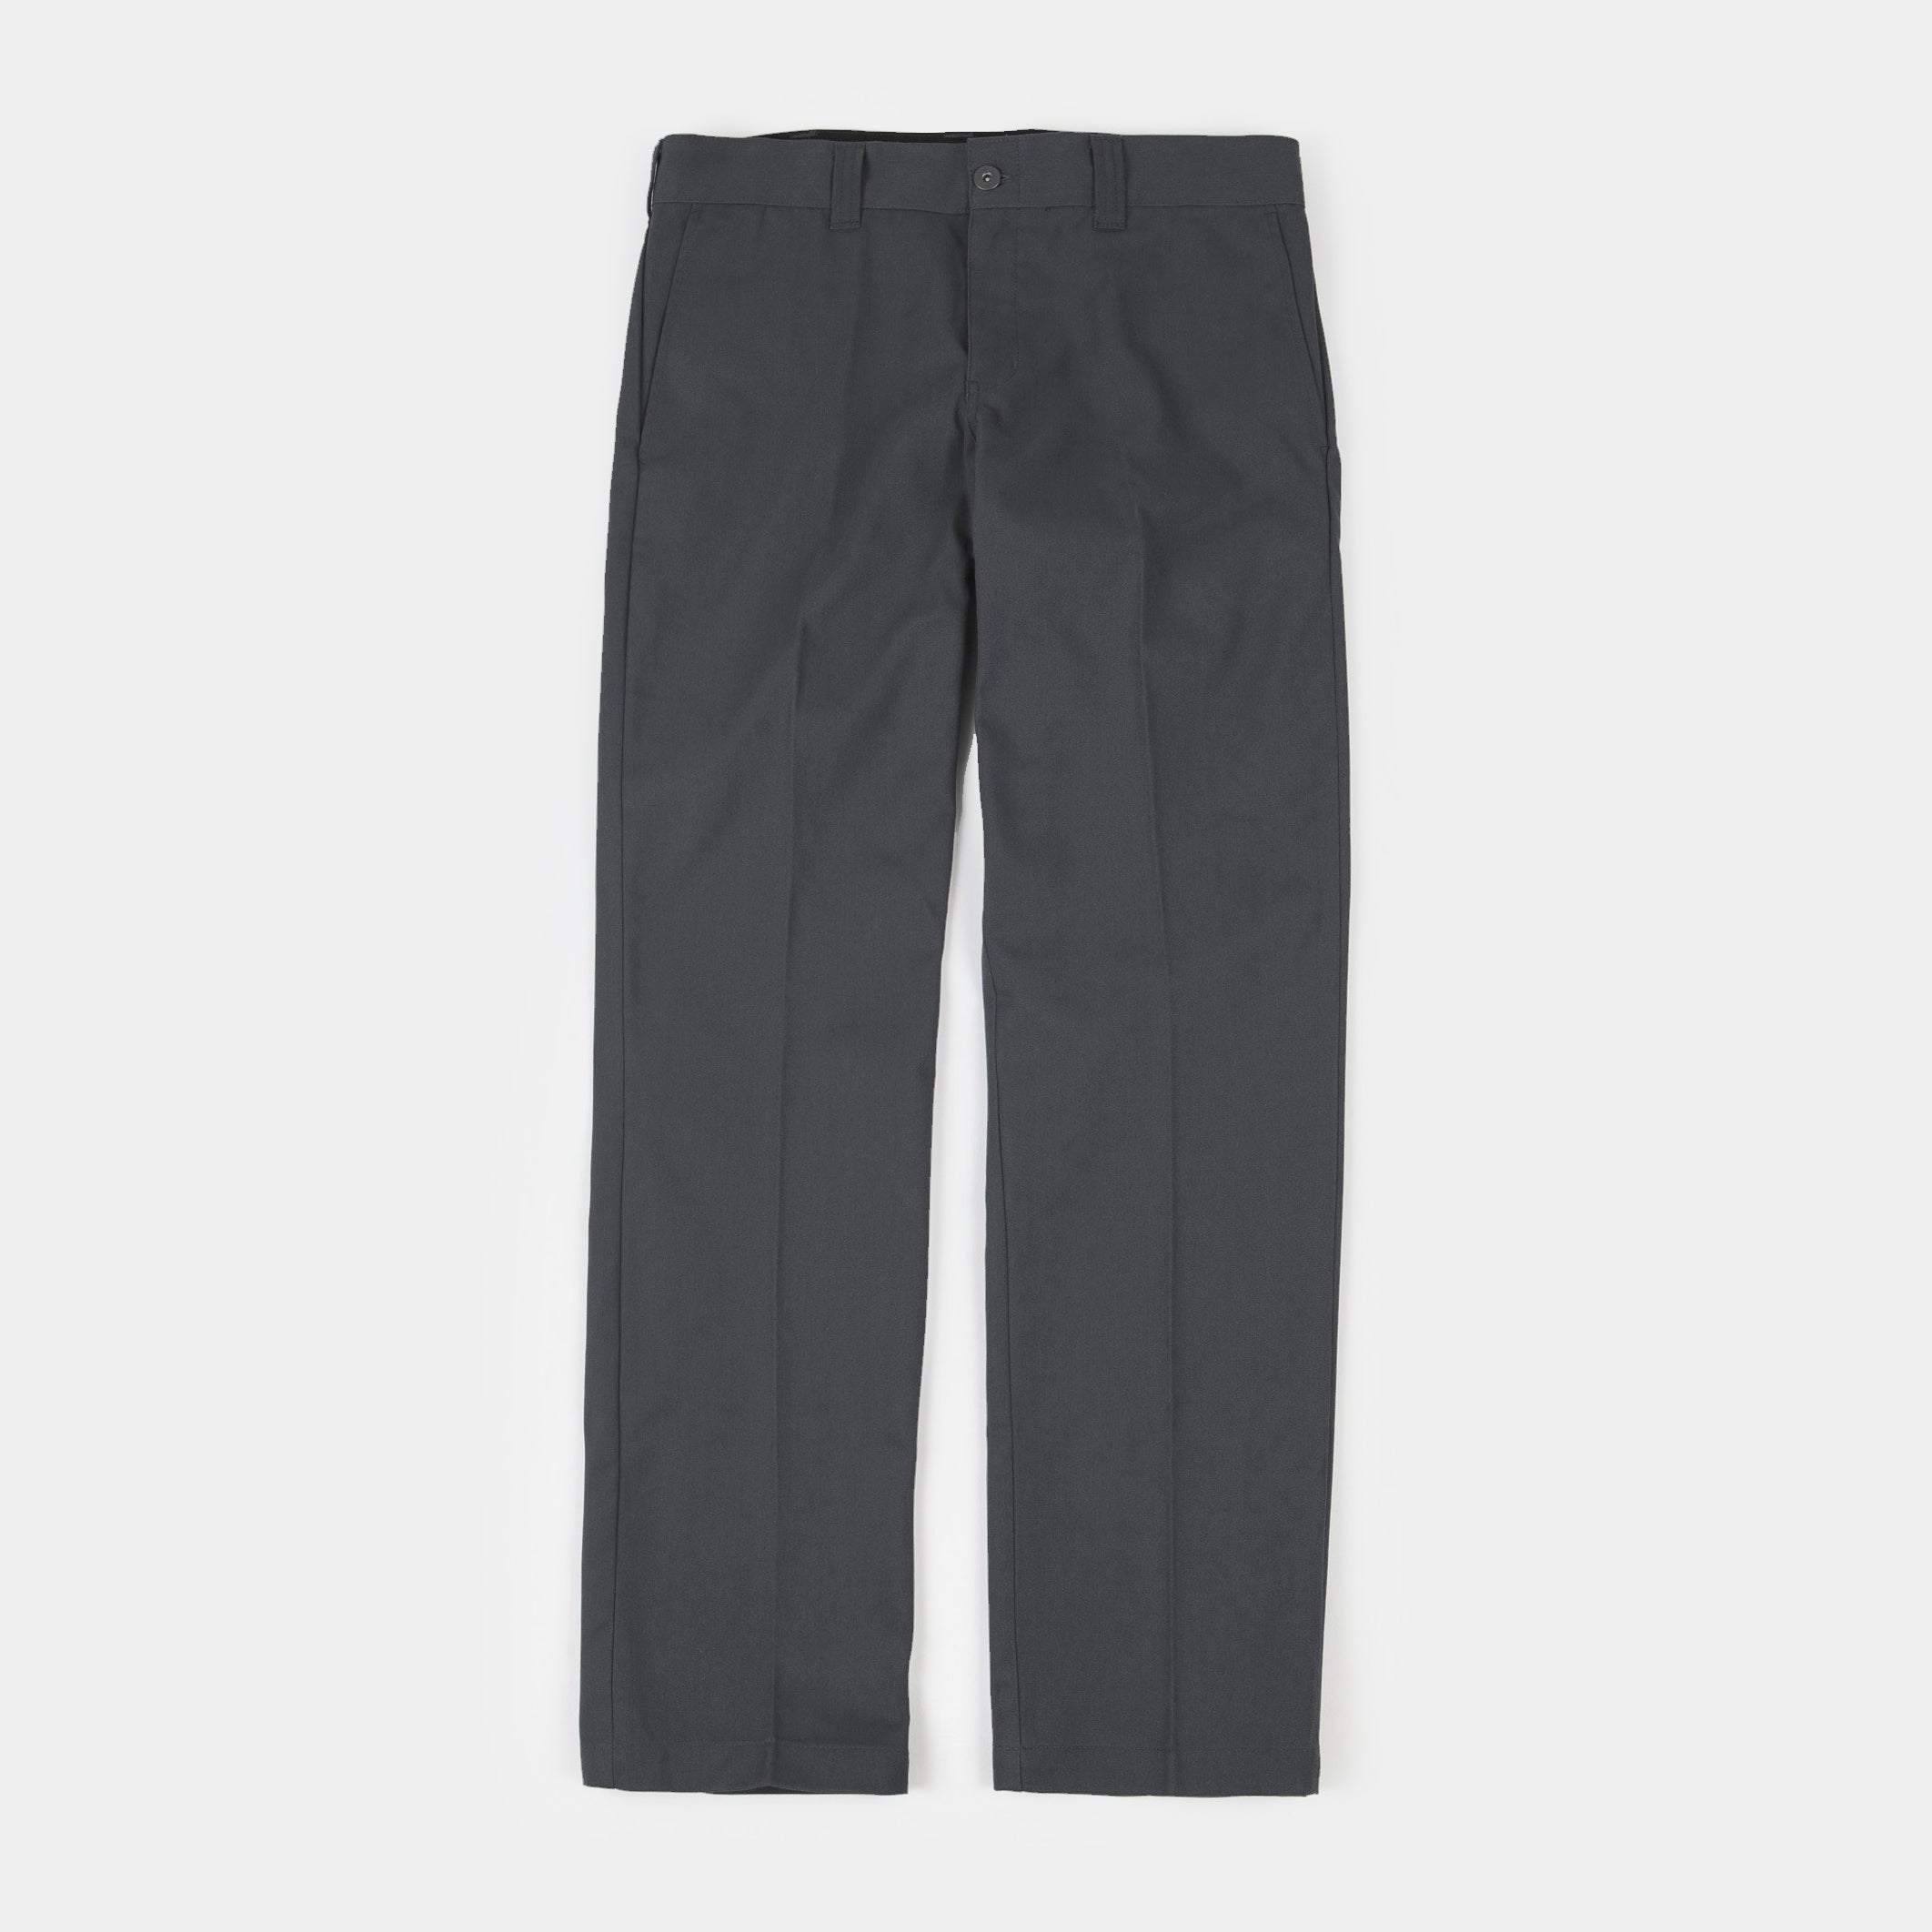 Max 44% OFF Gray Work Pants thegreatpicture.com